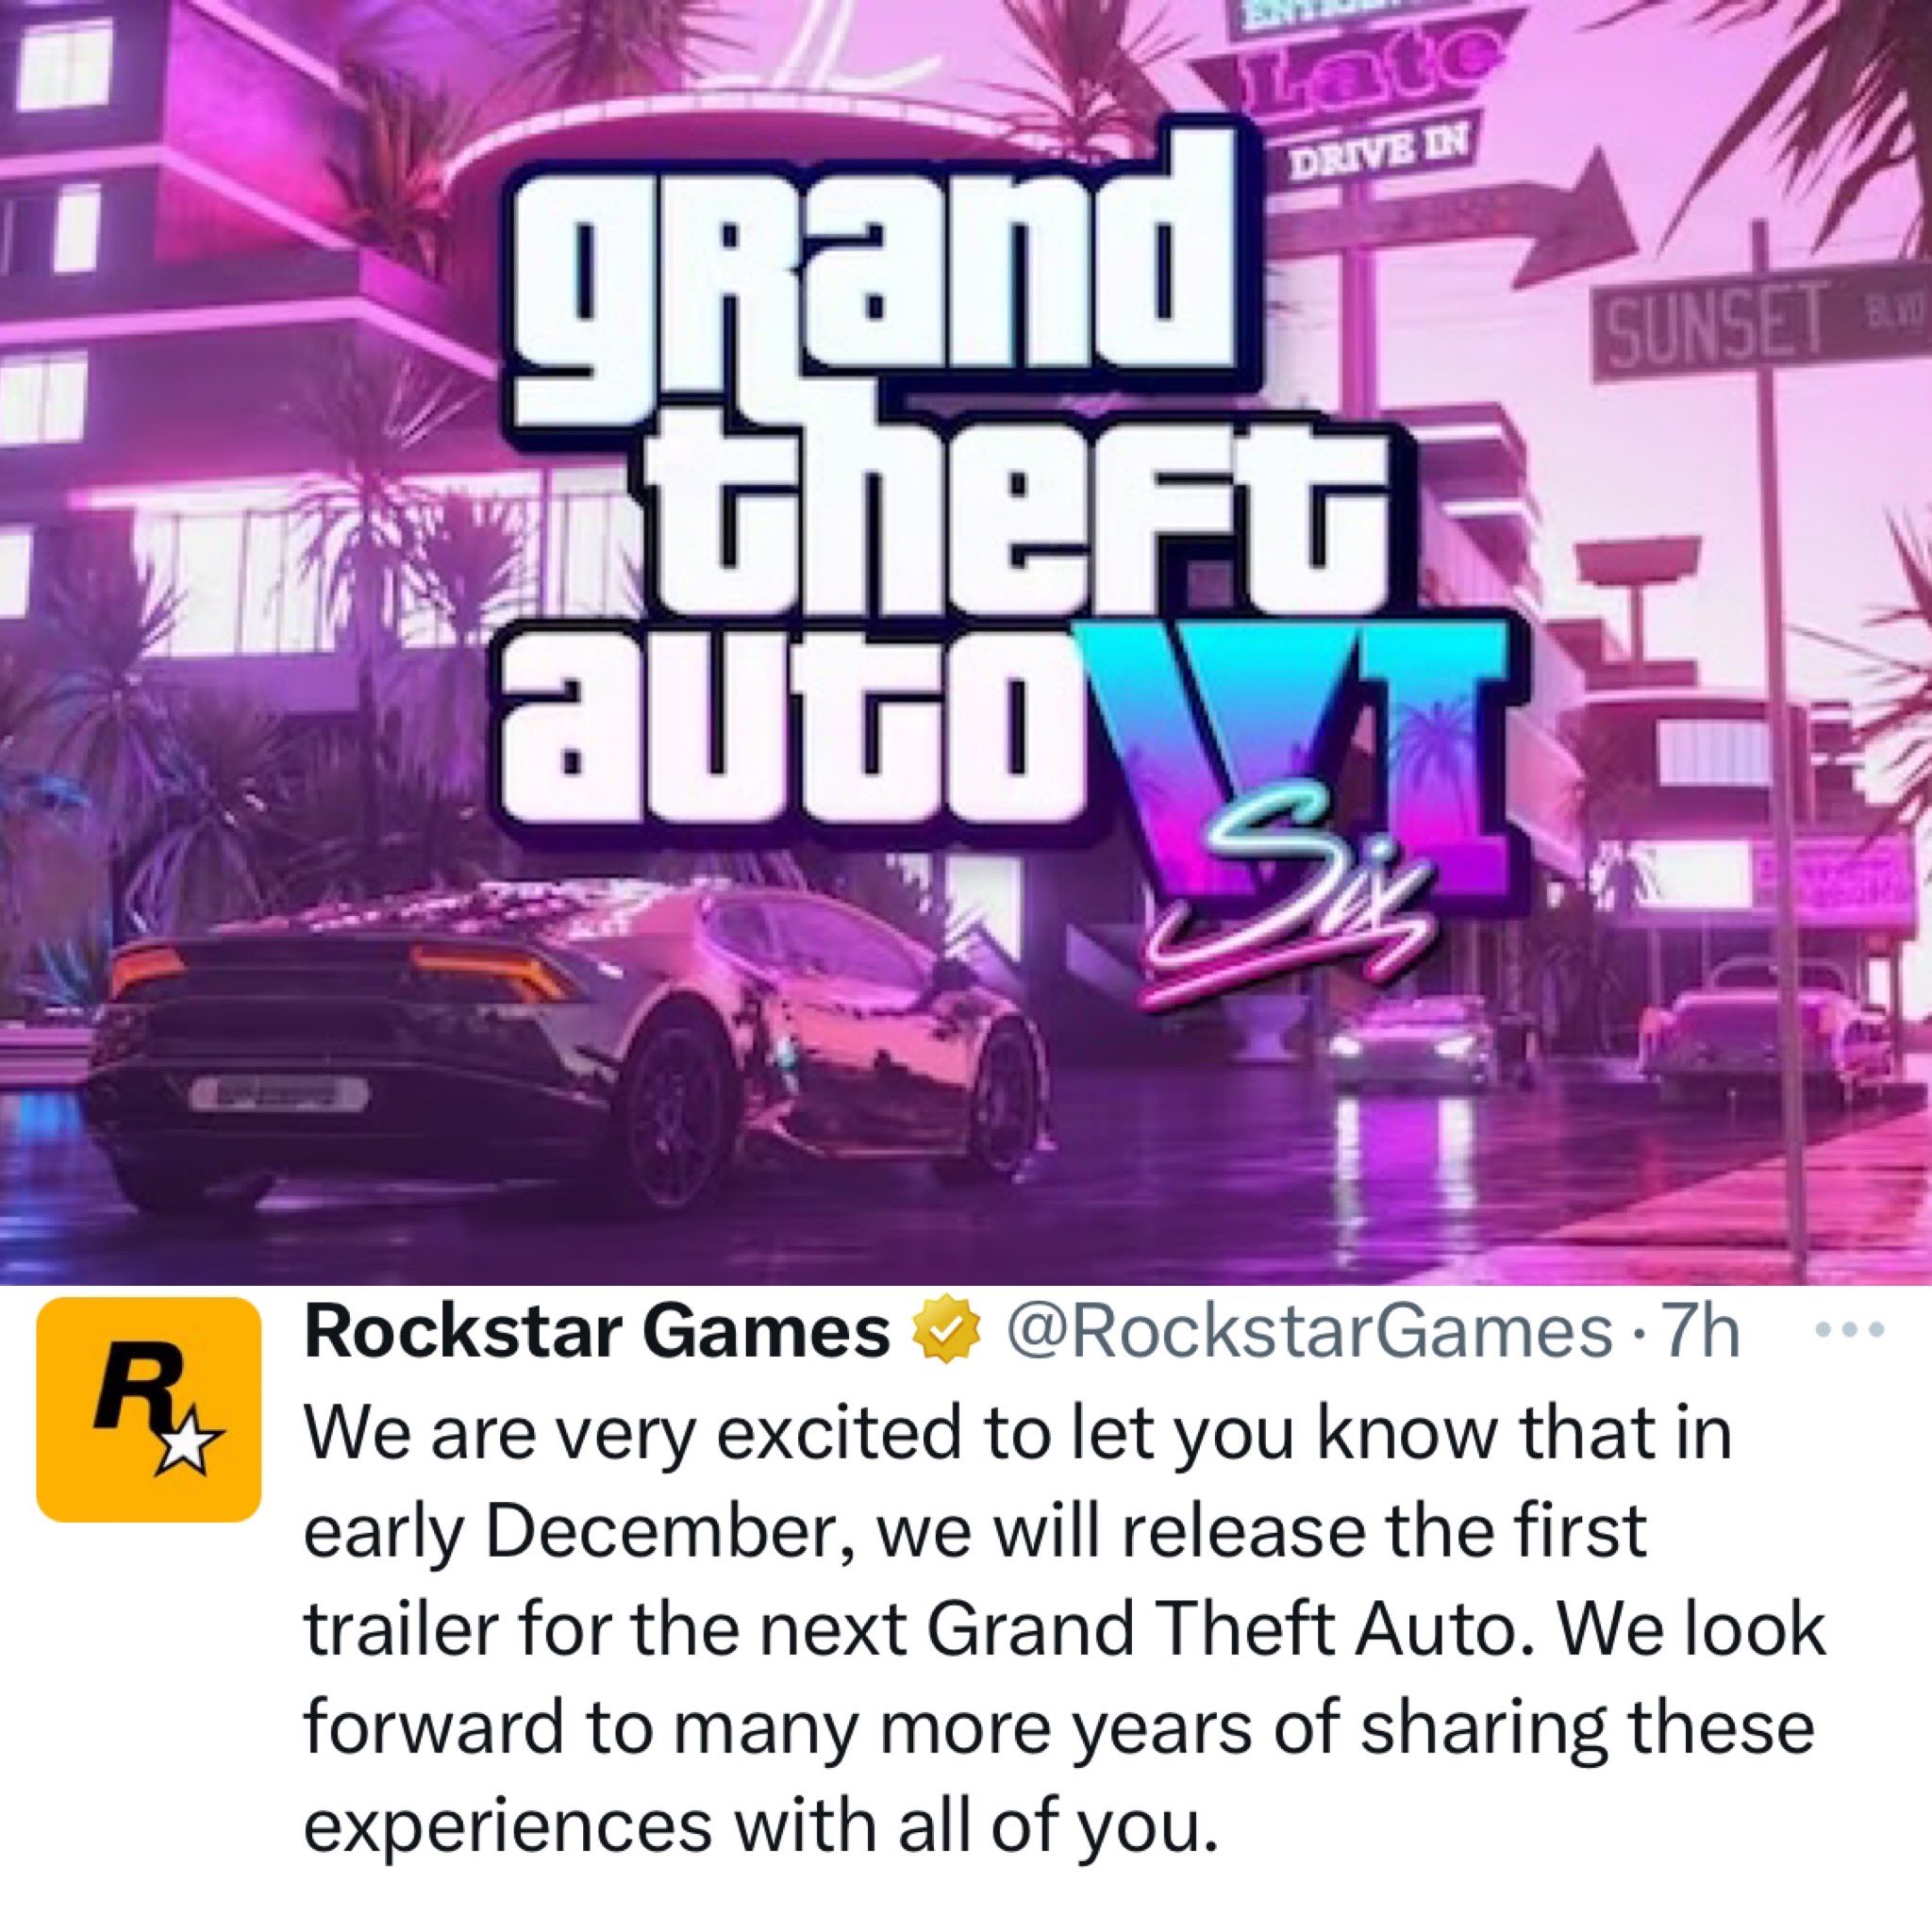 I'm excited about Gta6. How about y'all? : r/rockstar